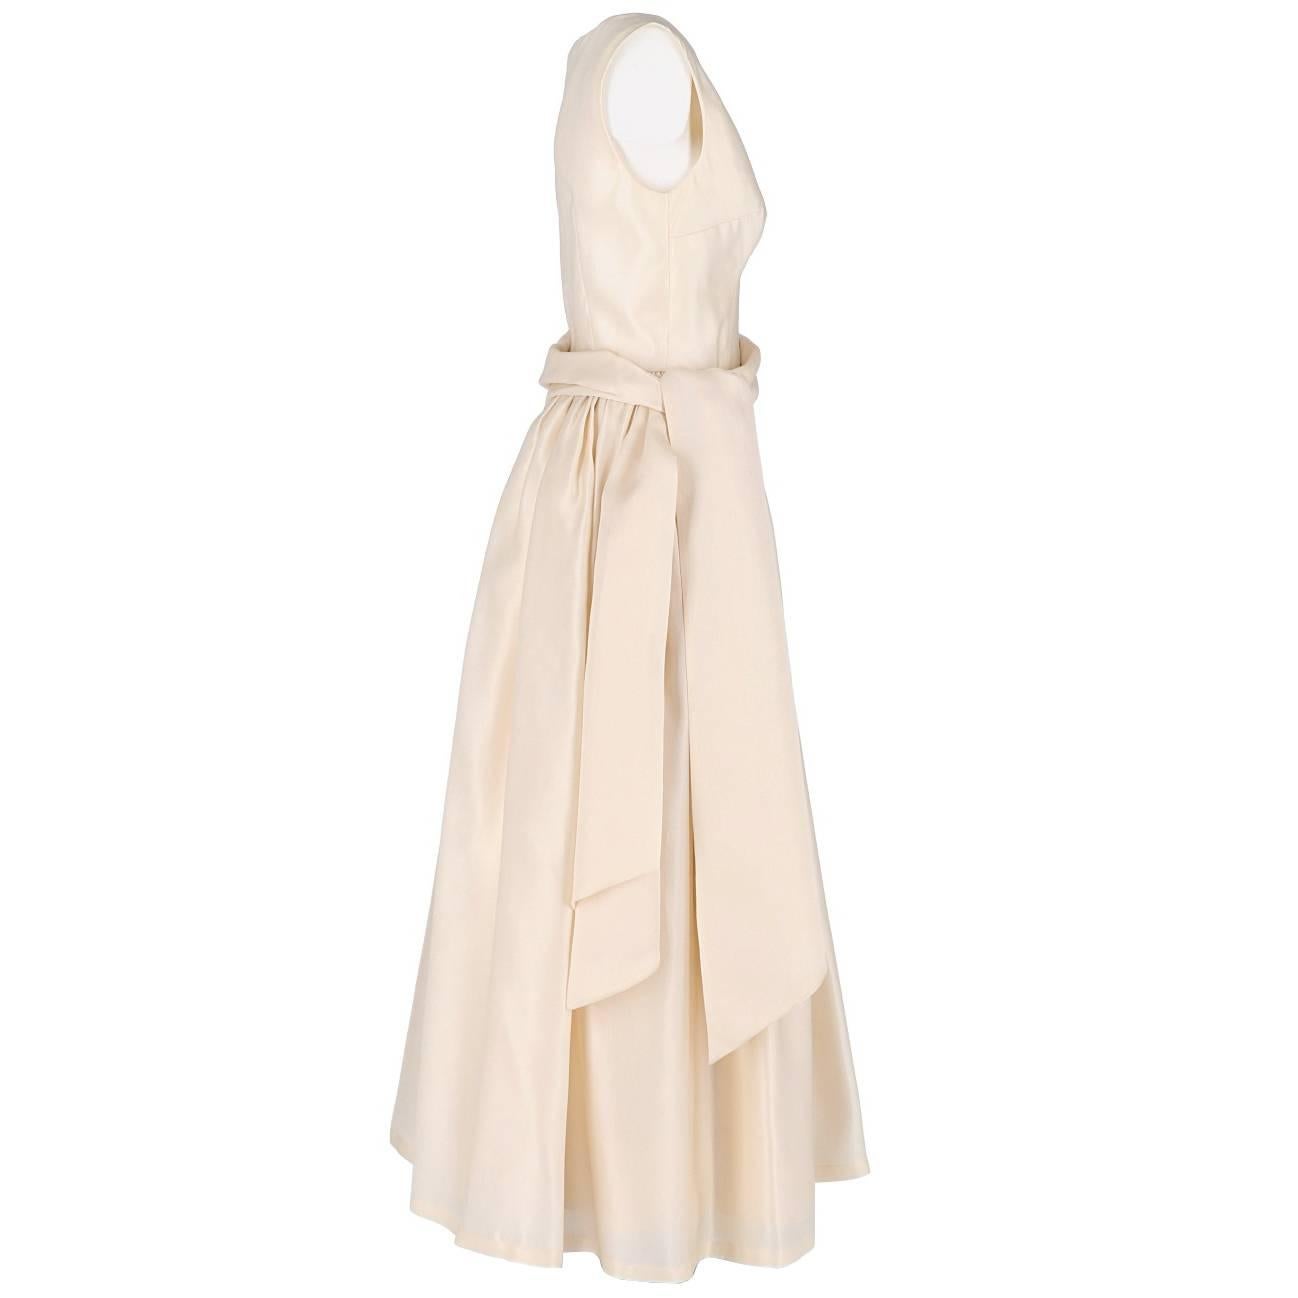 Beautiful Dolce & Gabbana wedding dress in ivory white silk with a draped waistband. It features no sleeves, V neckline, a skirt with wide folds and zip closure on the back. The item is vintage, it was produced in the 2000s and is in very good